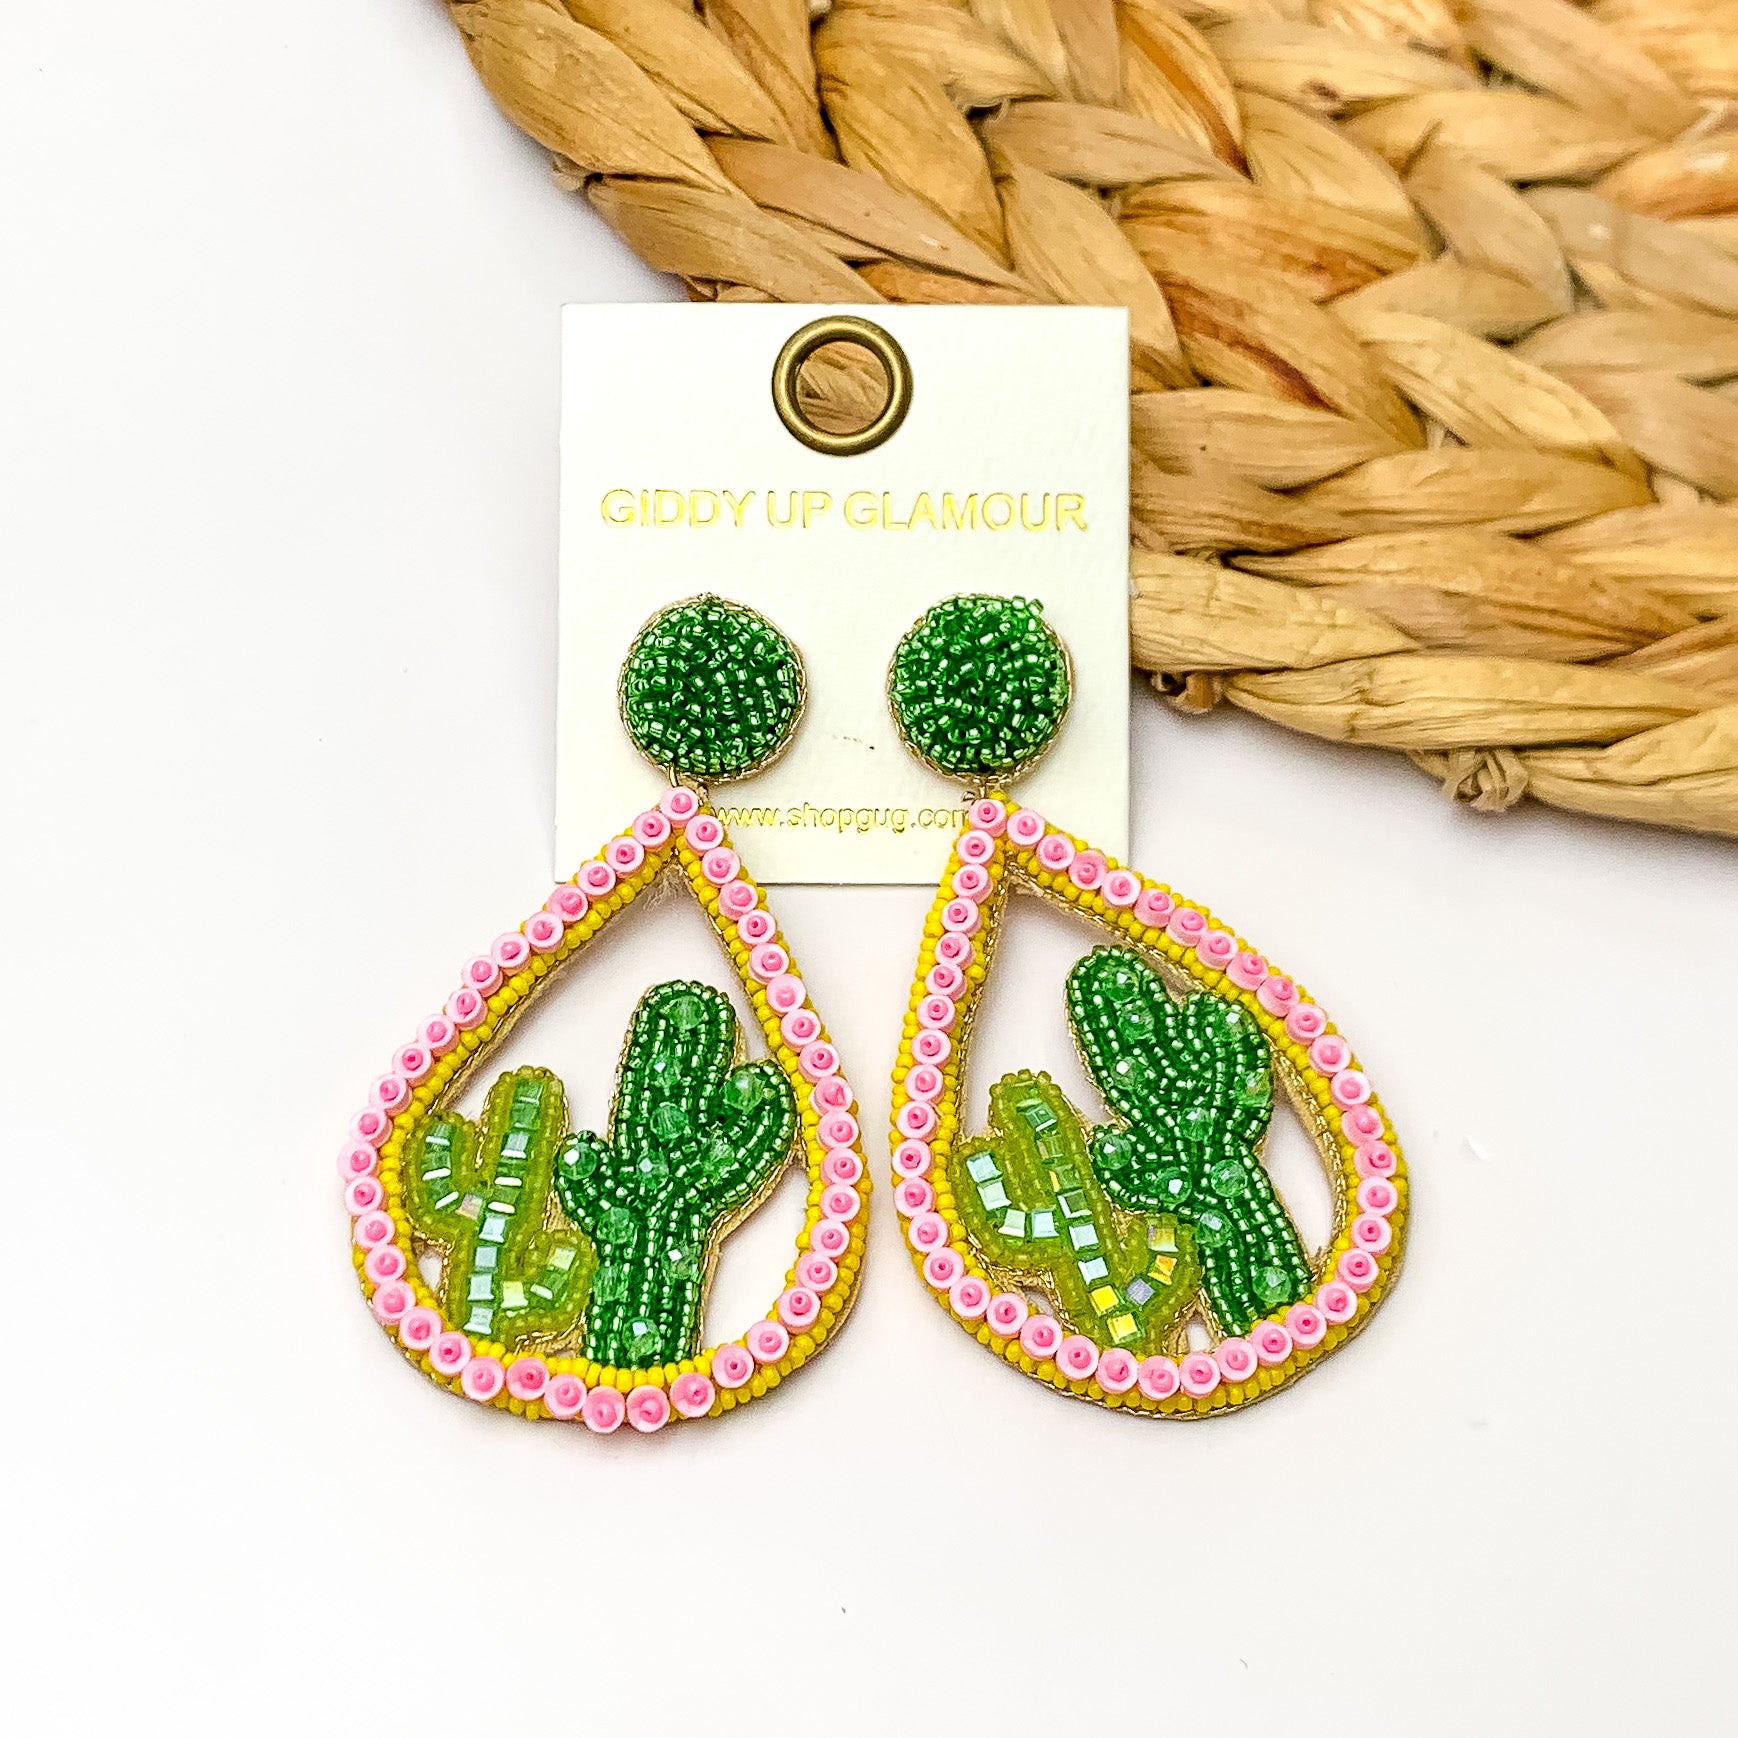 Beaded Open Teardrop Earrings With Cactus Scene on the Inside in Light Pink. Pictured on a white background with a wood piece decoration in the top right corner.